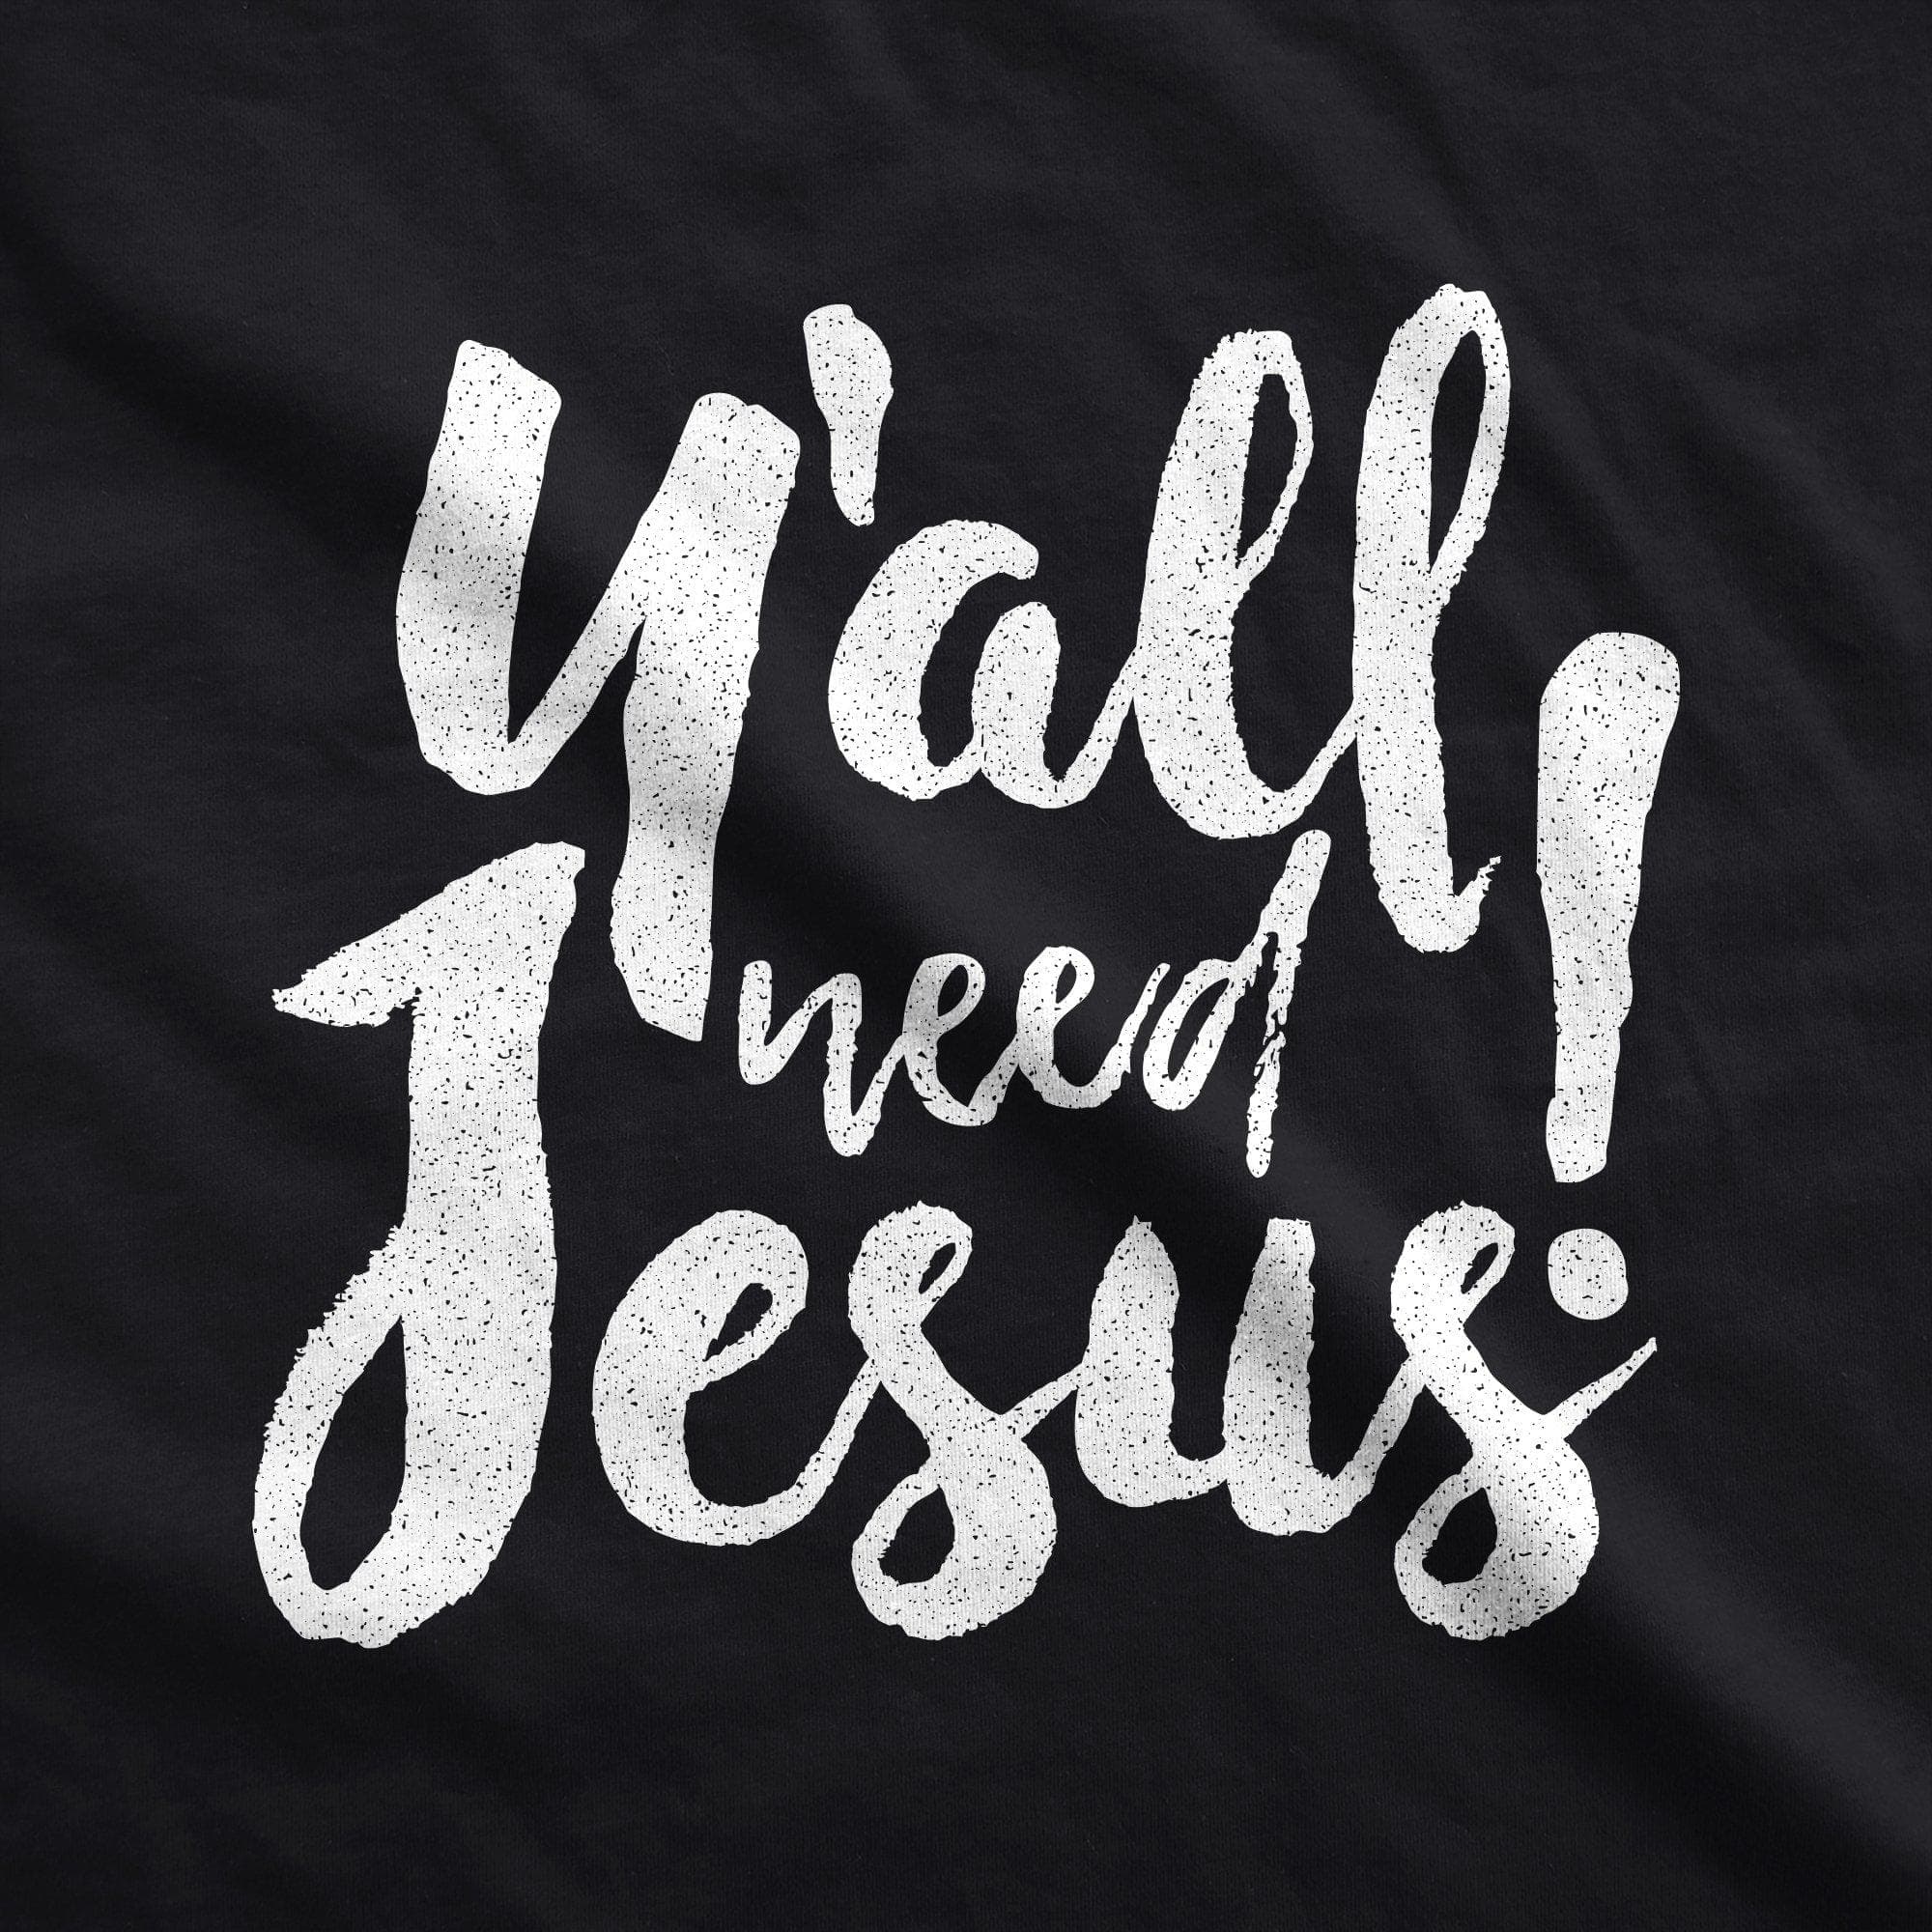 Y'all Need Jesus Face Mask Mask - Crazy Dog T-Shirts